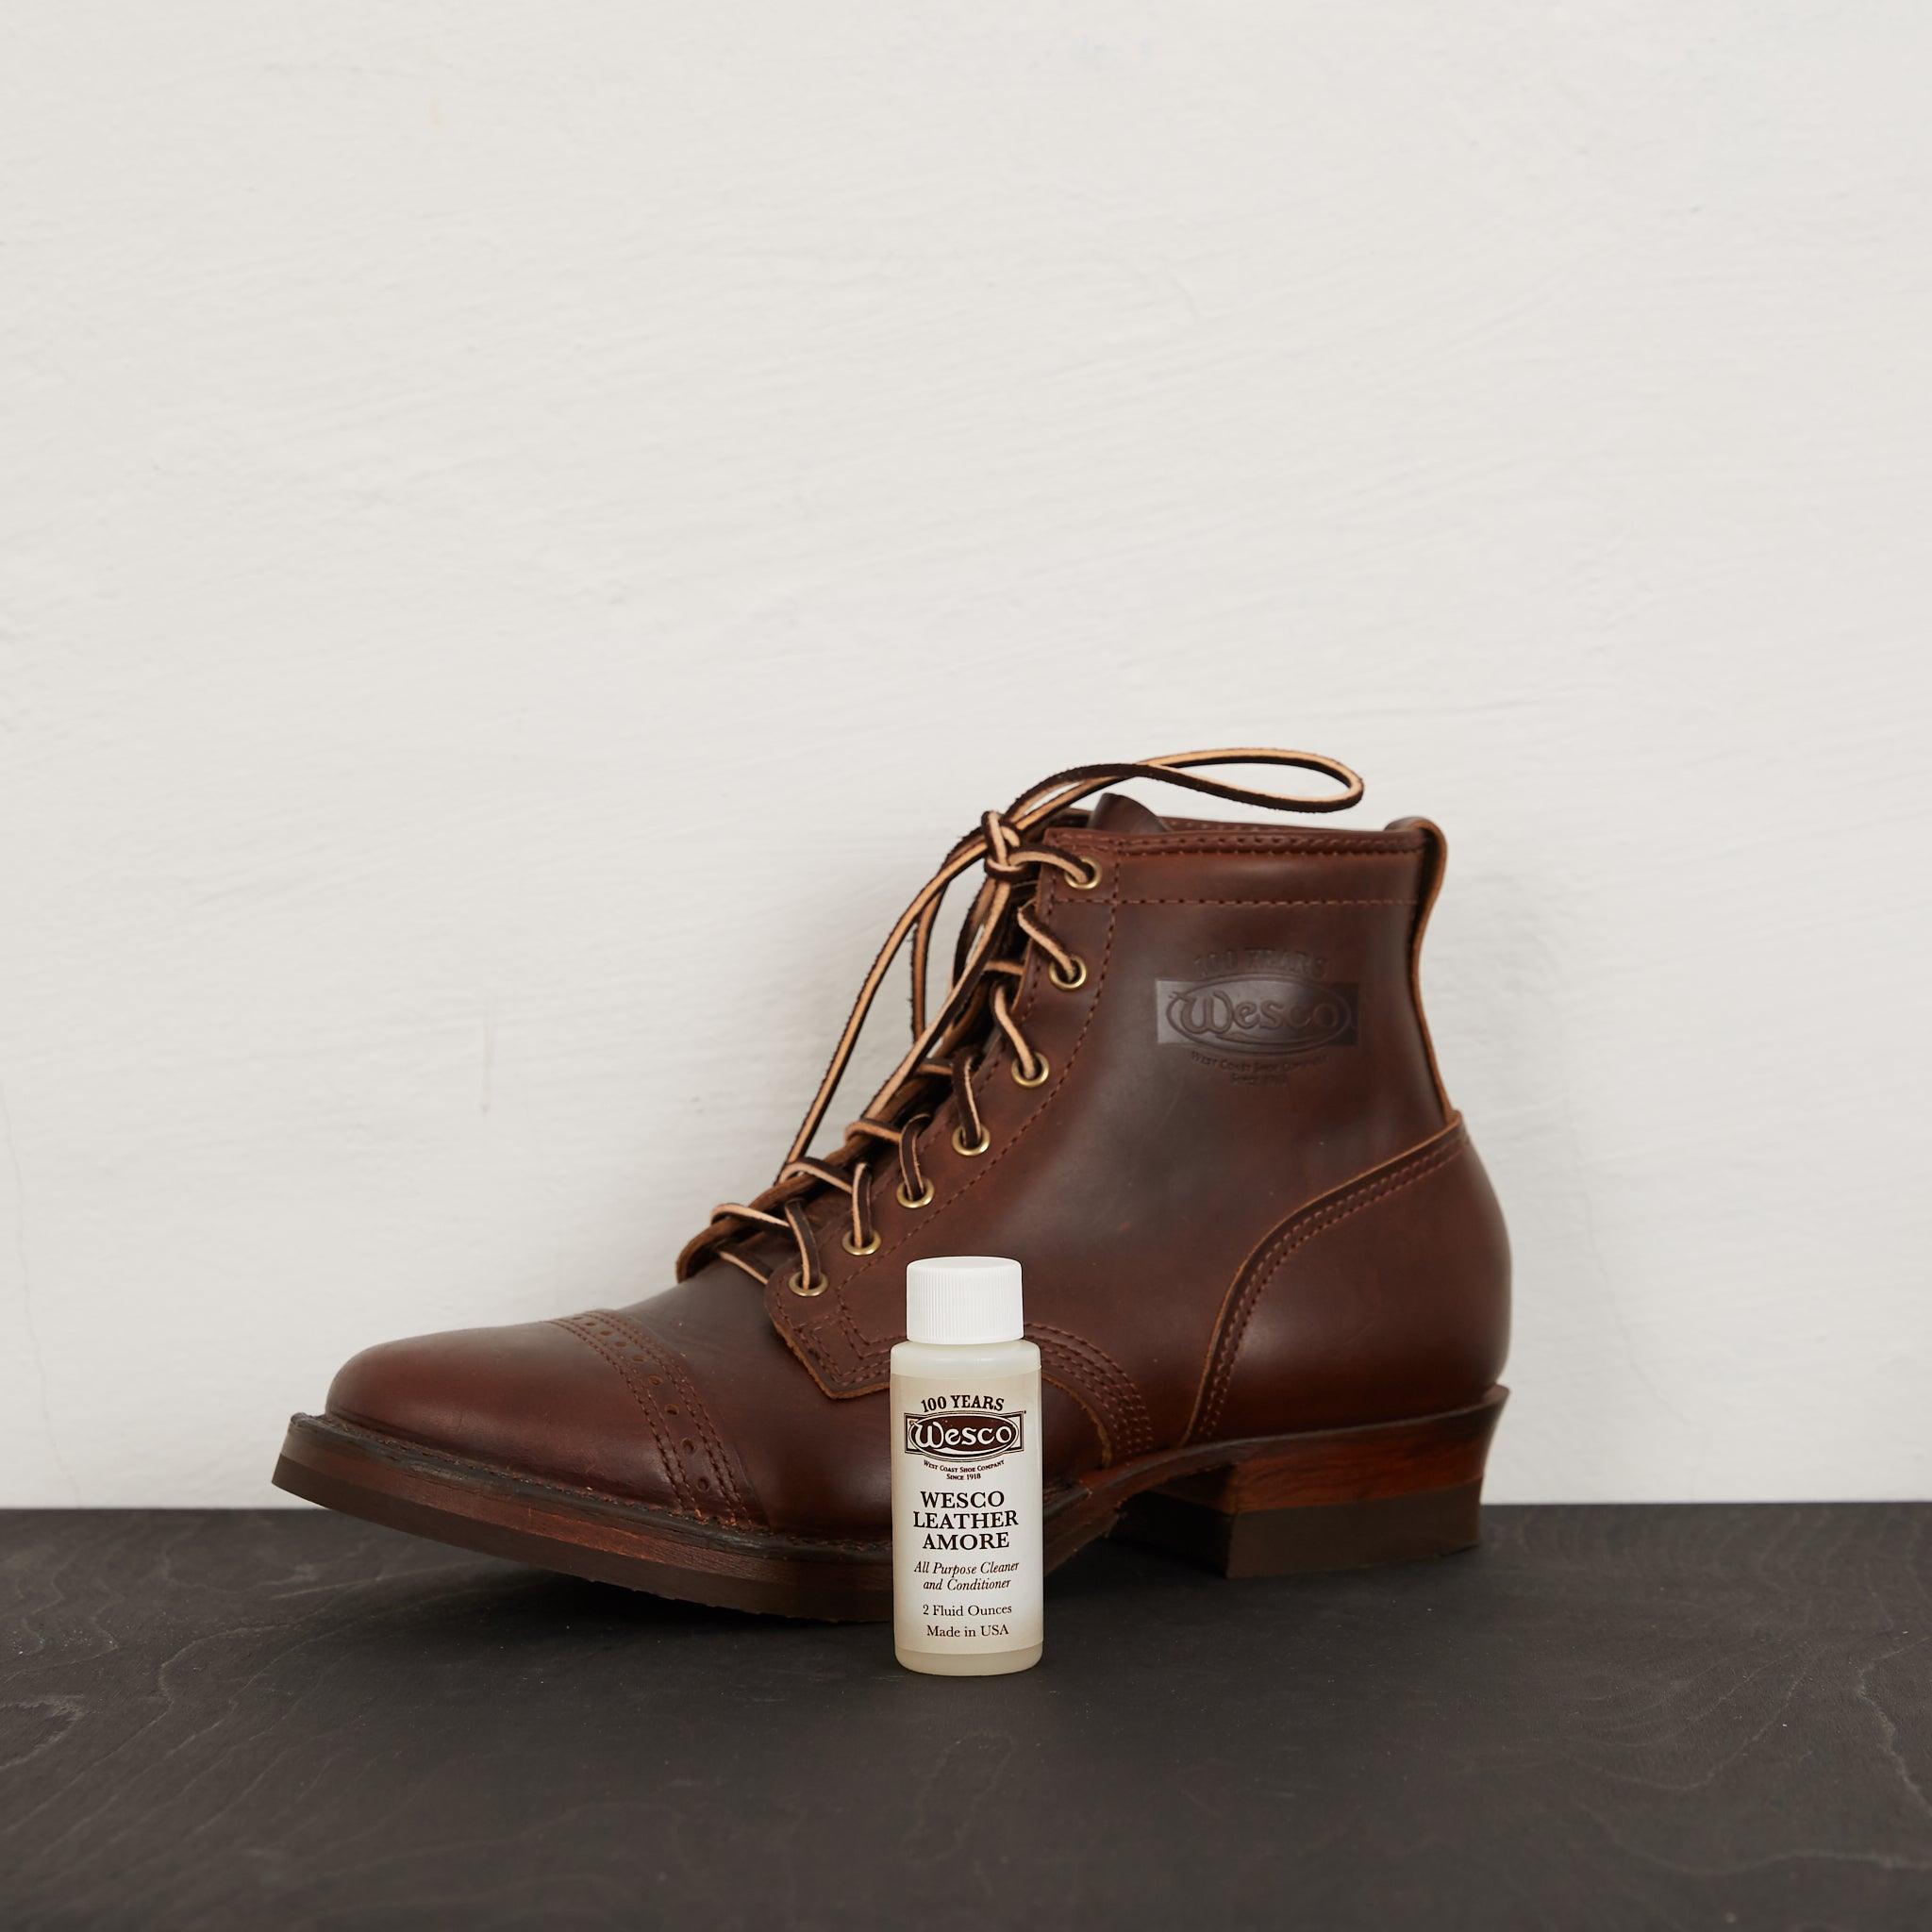 Wesco Leather Boot Dressing Leather Amore